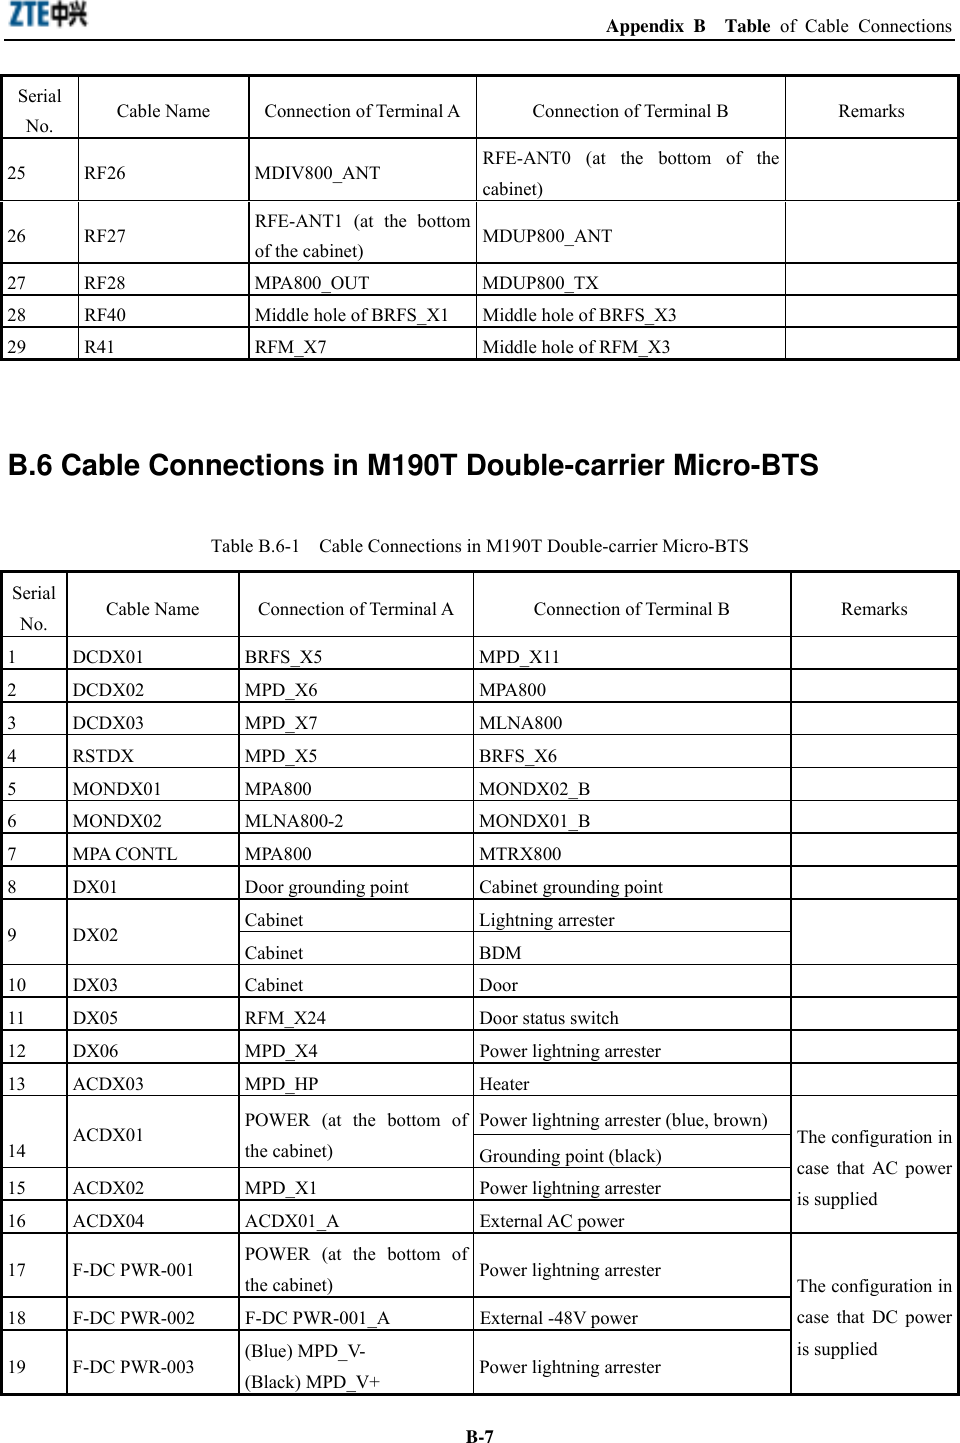  Appendix B  Table of Cable Connections  B-7Serial No.  Cable Name  Connection of Terminal A Connection of Terminal B  Remarks 25 RF26  MDIV800_ANT  RFE-ANT0 (at the bottom of the cabinet)   26 RF27  RFE-ANT1 (at the bottom of the cabinet)  MDUP800_ANT  27 RF28  MPA800_OUT  MDUP800_TX   28  RF40  Middle hole of BRFS_X1  Middle hole of BRFS_X3   29  R41  RFM_X7  Middle hole of RFM_X3    B.6 Cable Connections in M190T Double-carrier Micro-BTS Table B.6-1    Cable Connections in M190T Double-carrier Micro-BTS Serial No.  Cable Name  Connection of Terminal A Connection of Terminal B  Remarks 1 DCDX01  BRFS_X5  MPD_X11   2 DCDX02  MPD_X6  MPA800   3 DCDX03  MPD_X7  MLNA800   4 RSTDX  MPD_X5  BRFS_X6   5 MONDX01  MPA800  MONDX02_B   6 MONDX02  MLNA800-2  MONDX01_B   7 MPA CONTL  MPA800  MTRX800   8  DX01  Door grounding point  Cabinet grounding point   Cabinet Lightning arrester  9 DX02 Cabinet BDM  10 DX03  Cabinet  Door   11  DX05  RFM_X24  Door status switch   12  DX06  MPD_X4  Power lightning arrester   13 ACDX03  MPD_HP  Heater   Power lightning arrester (blue, brown)  14  ACDX01  POWER (at the bottom of the cabinet)  Grounding point (black) 15  ACDX02  MPD_X1  Power lightning arrester 16 ACDX04  ACDX01_A  External AC power The configuration in case that AC power is supplied 17 F-DC PWR-001  POWER (at the bottom of the cabinet)  Power lightning arrester 18  F-DC PWR-002  F-DC PWR-001_A  External -48V power 19 F-DC PWR-003  (Blue) MPD_V- (Black) MPD_V+  Power lightning arrester The configuration in case that DC power is supplied 